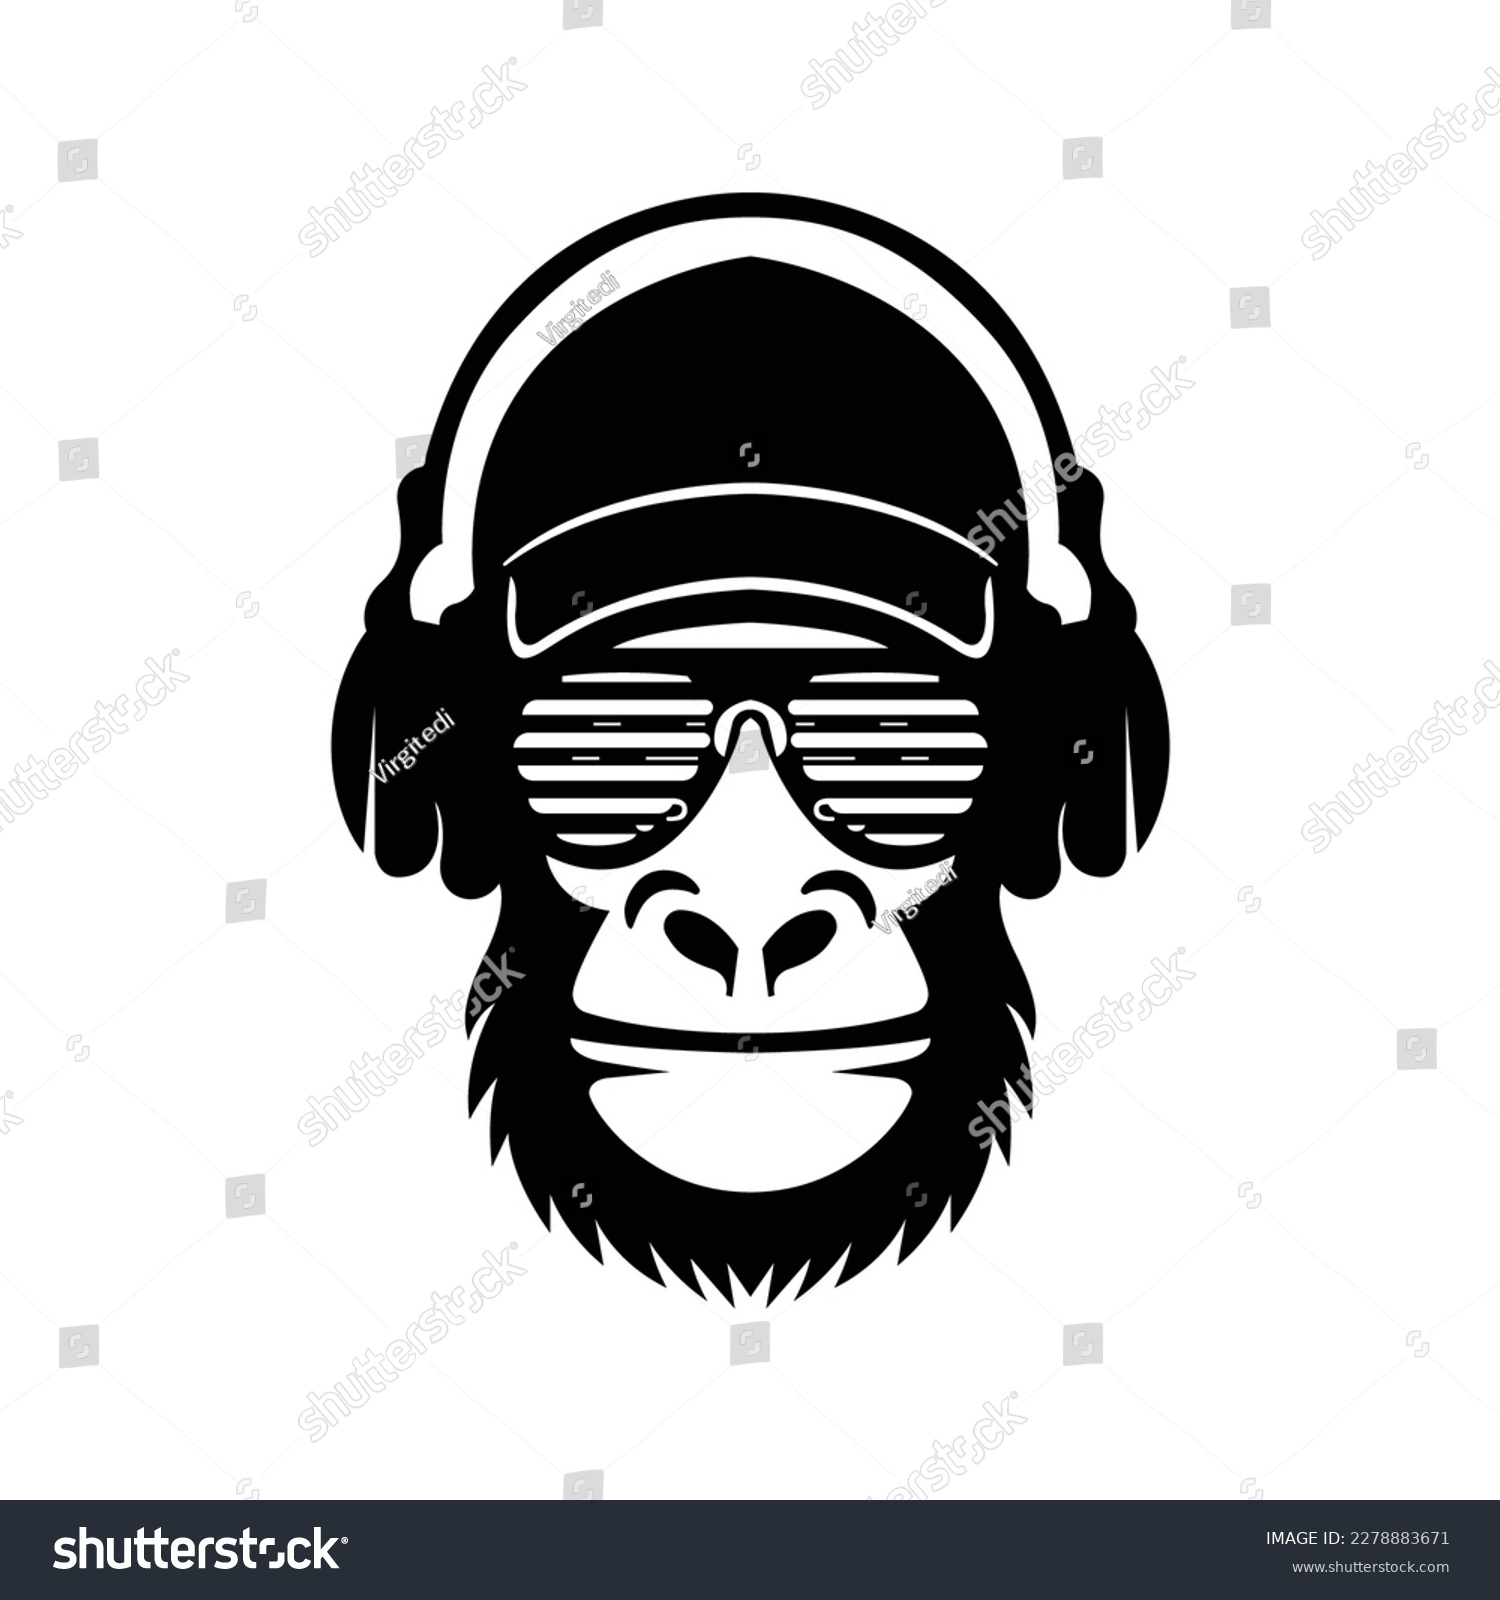 SVG of Monkey face silhouette with headphone svg